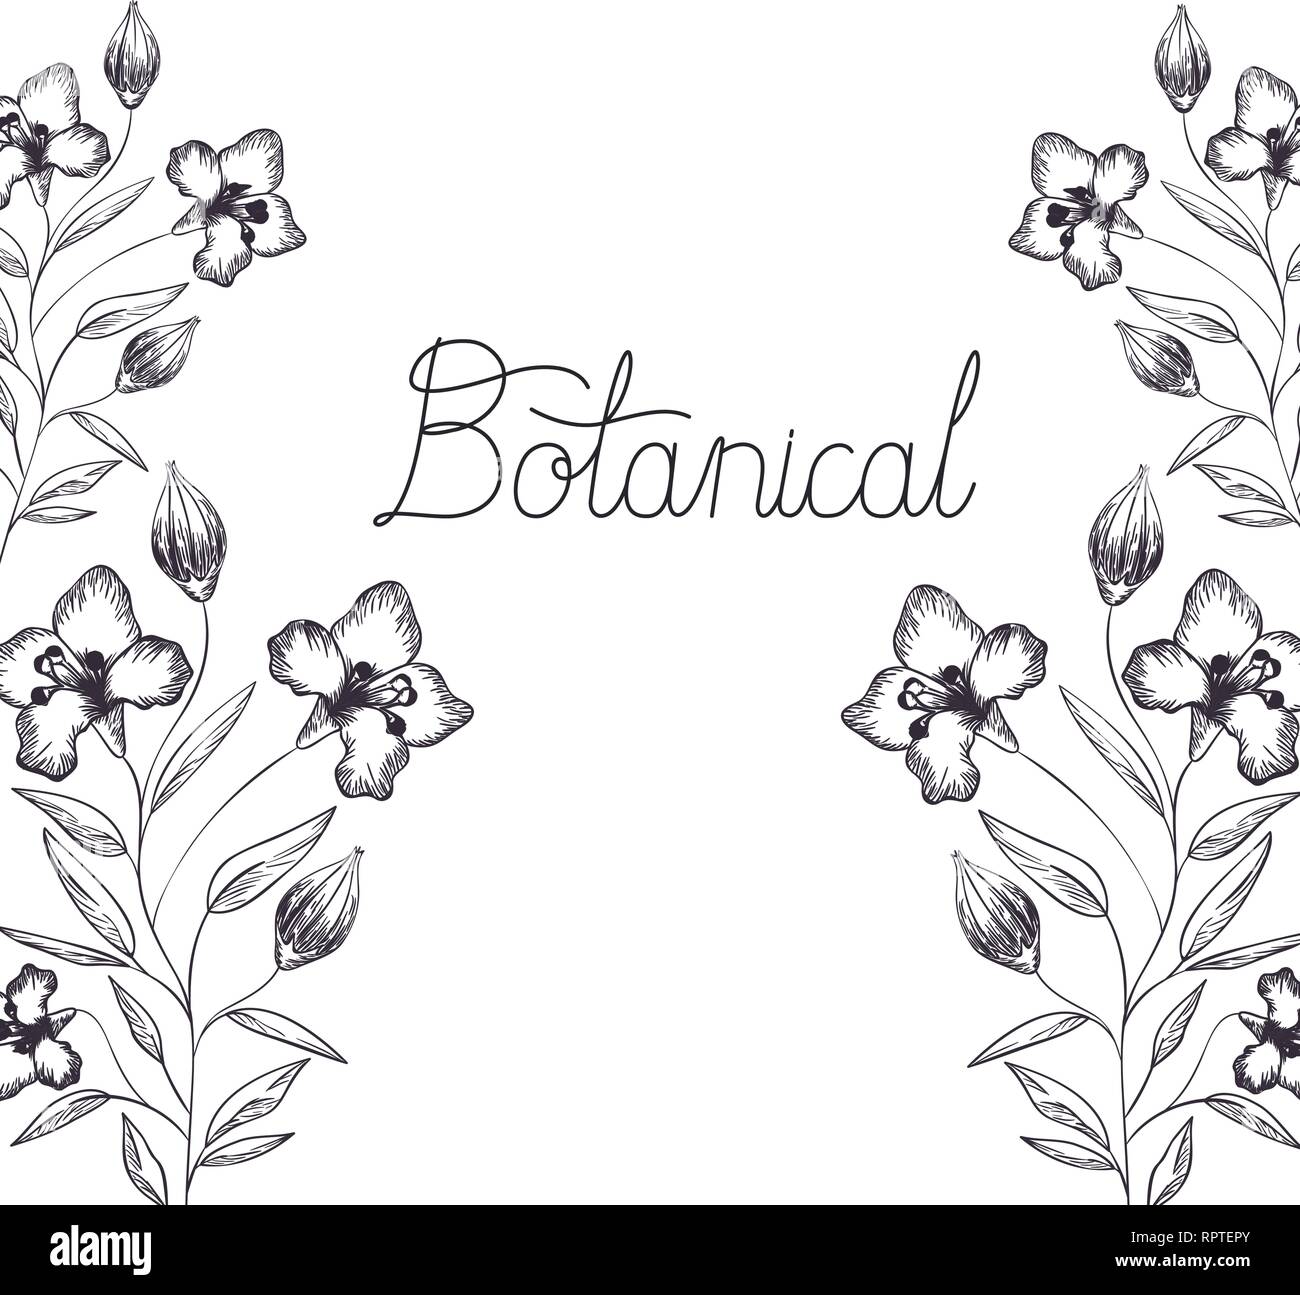 botanical label with plants isolated icon Stock Vector